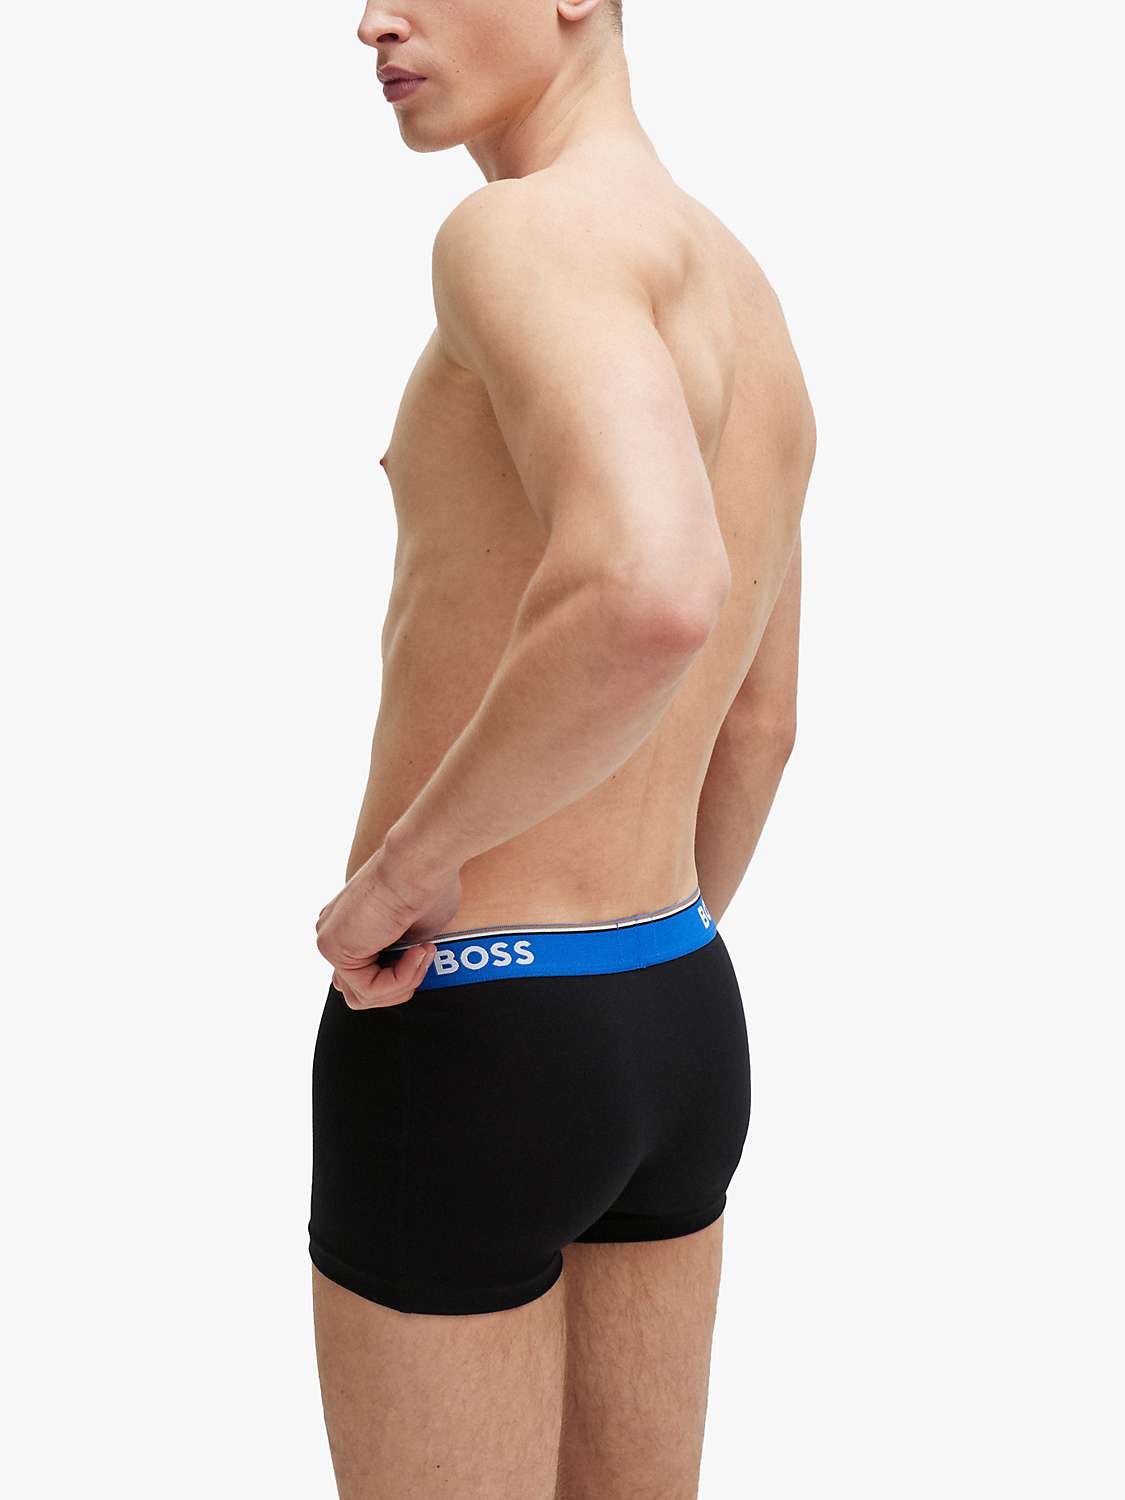 Buy BOSS Essential Trunks, Pack of 3 Online at johnlewis.com